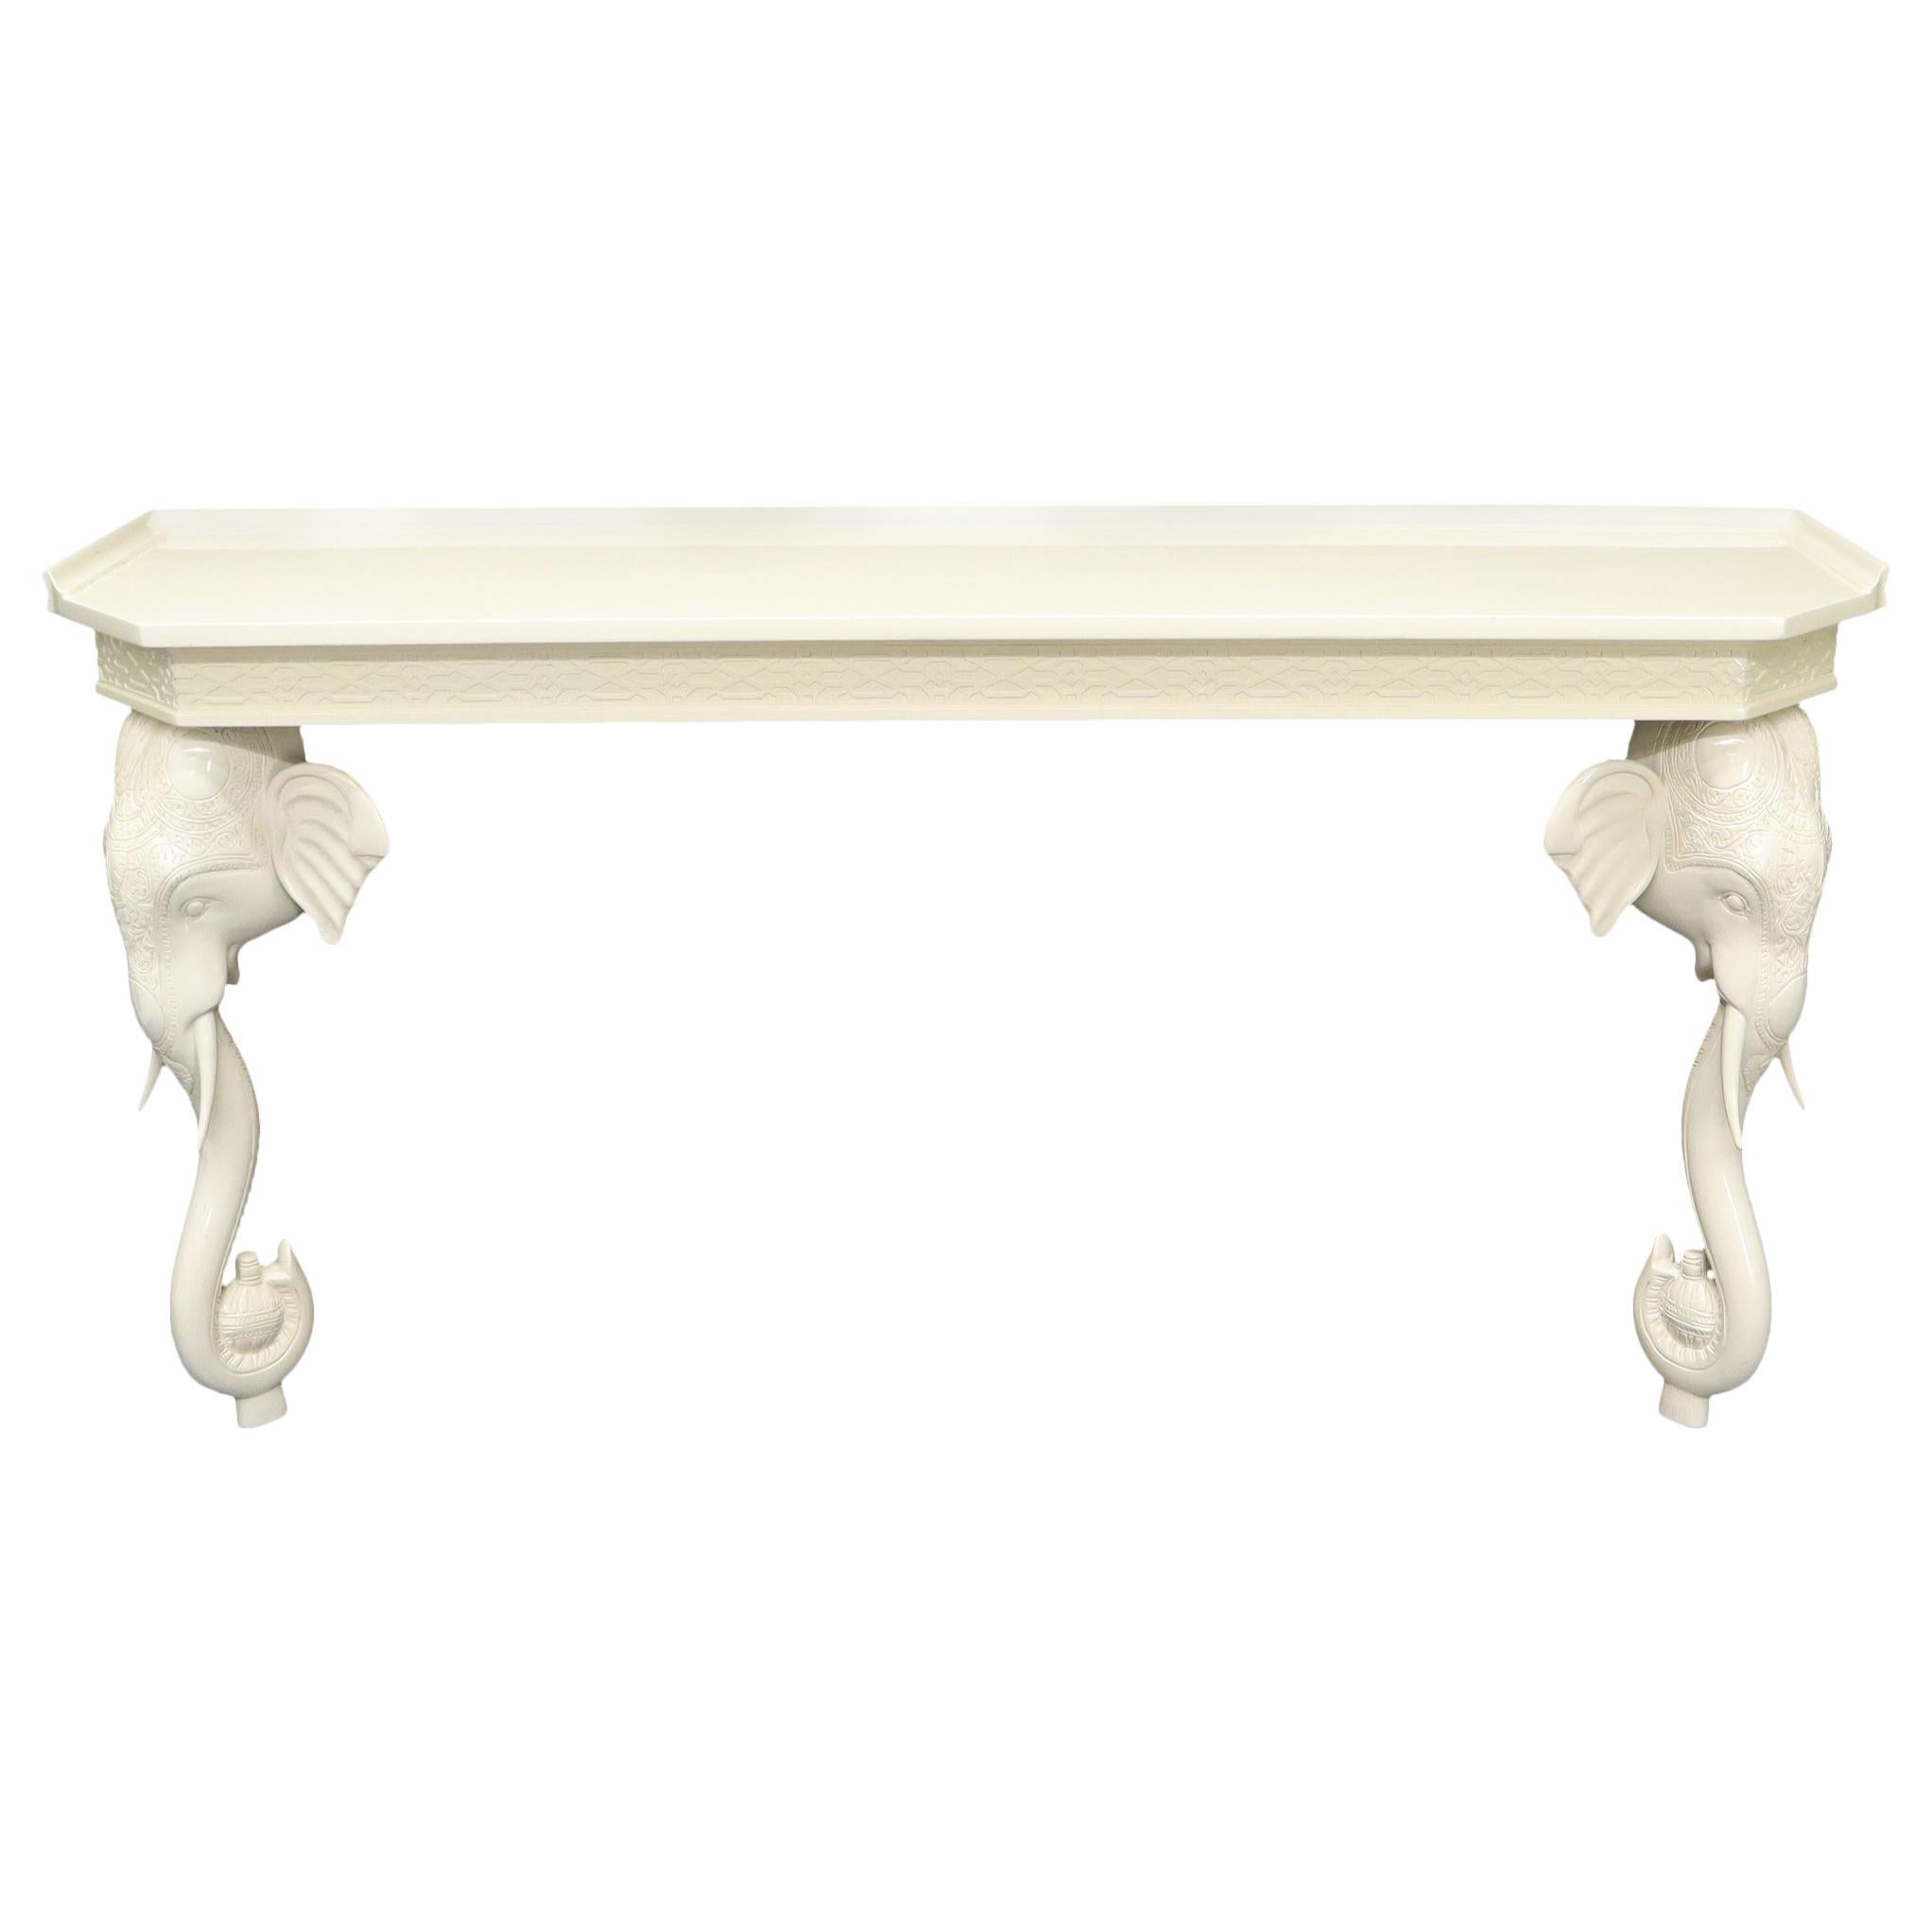 White Lacquer Carved Elephant Bases Console Wall Table For Sale